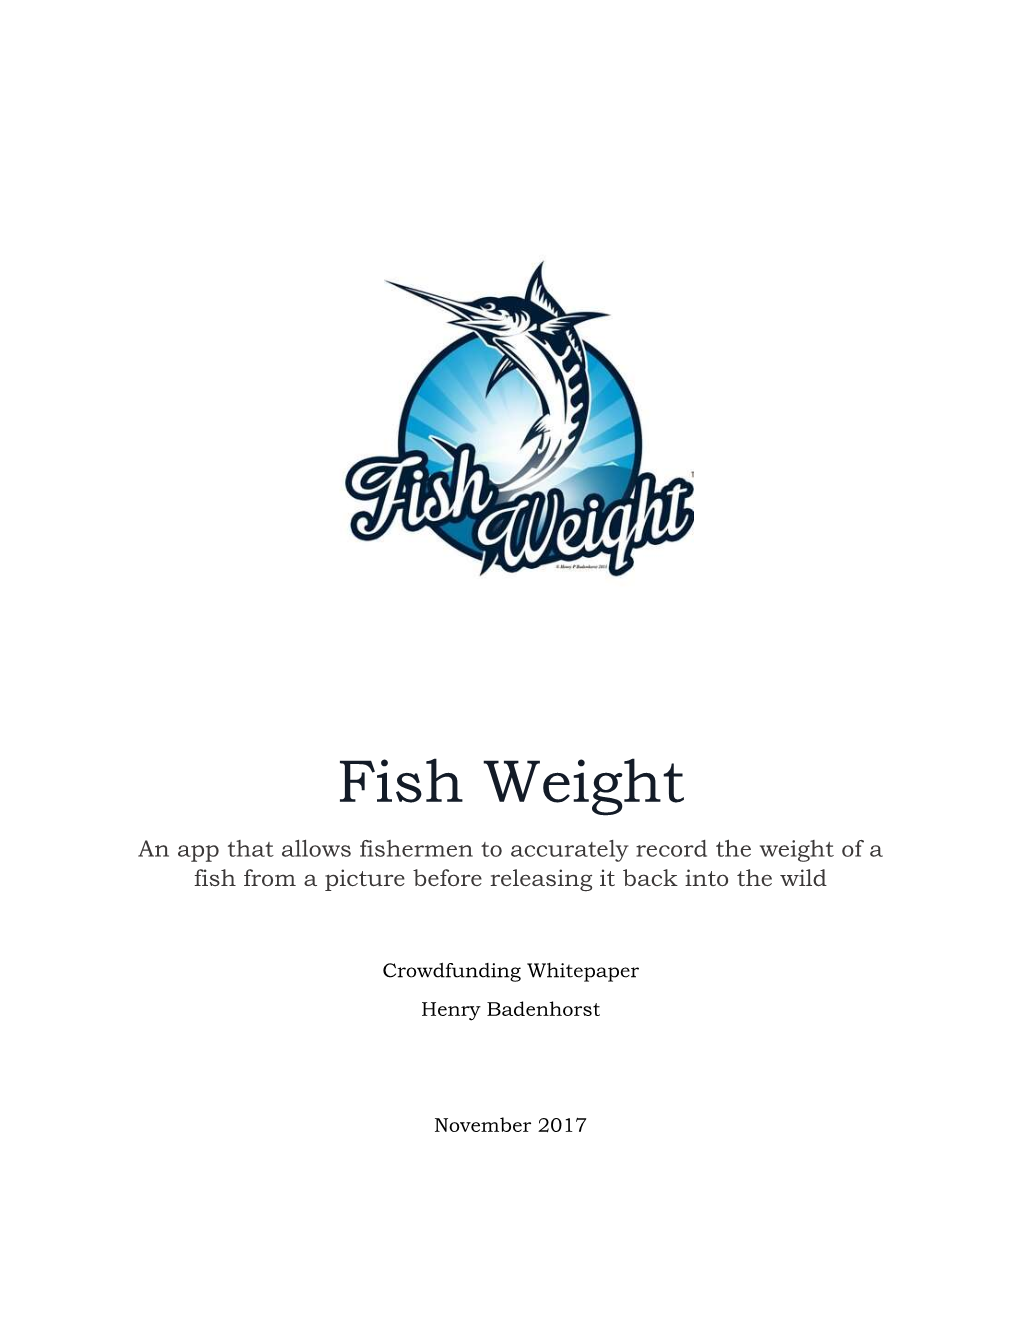 Fish Weight an App That Allows Fishermen to Accurately Record the Weight of a Fish from a Picture Before Releasing It Back Into the Wild